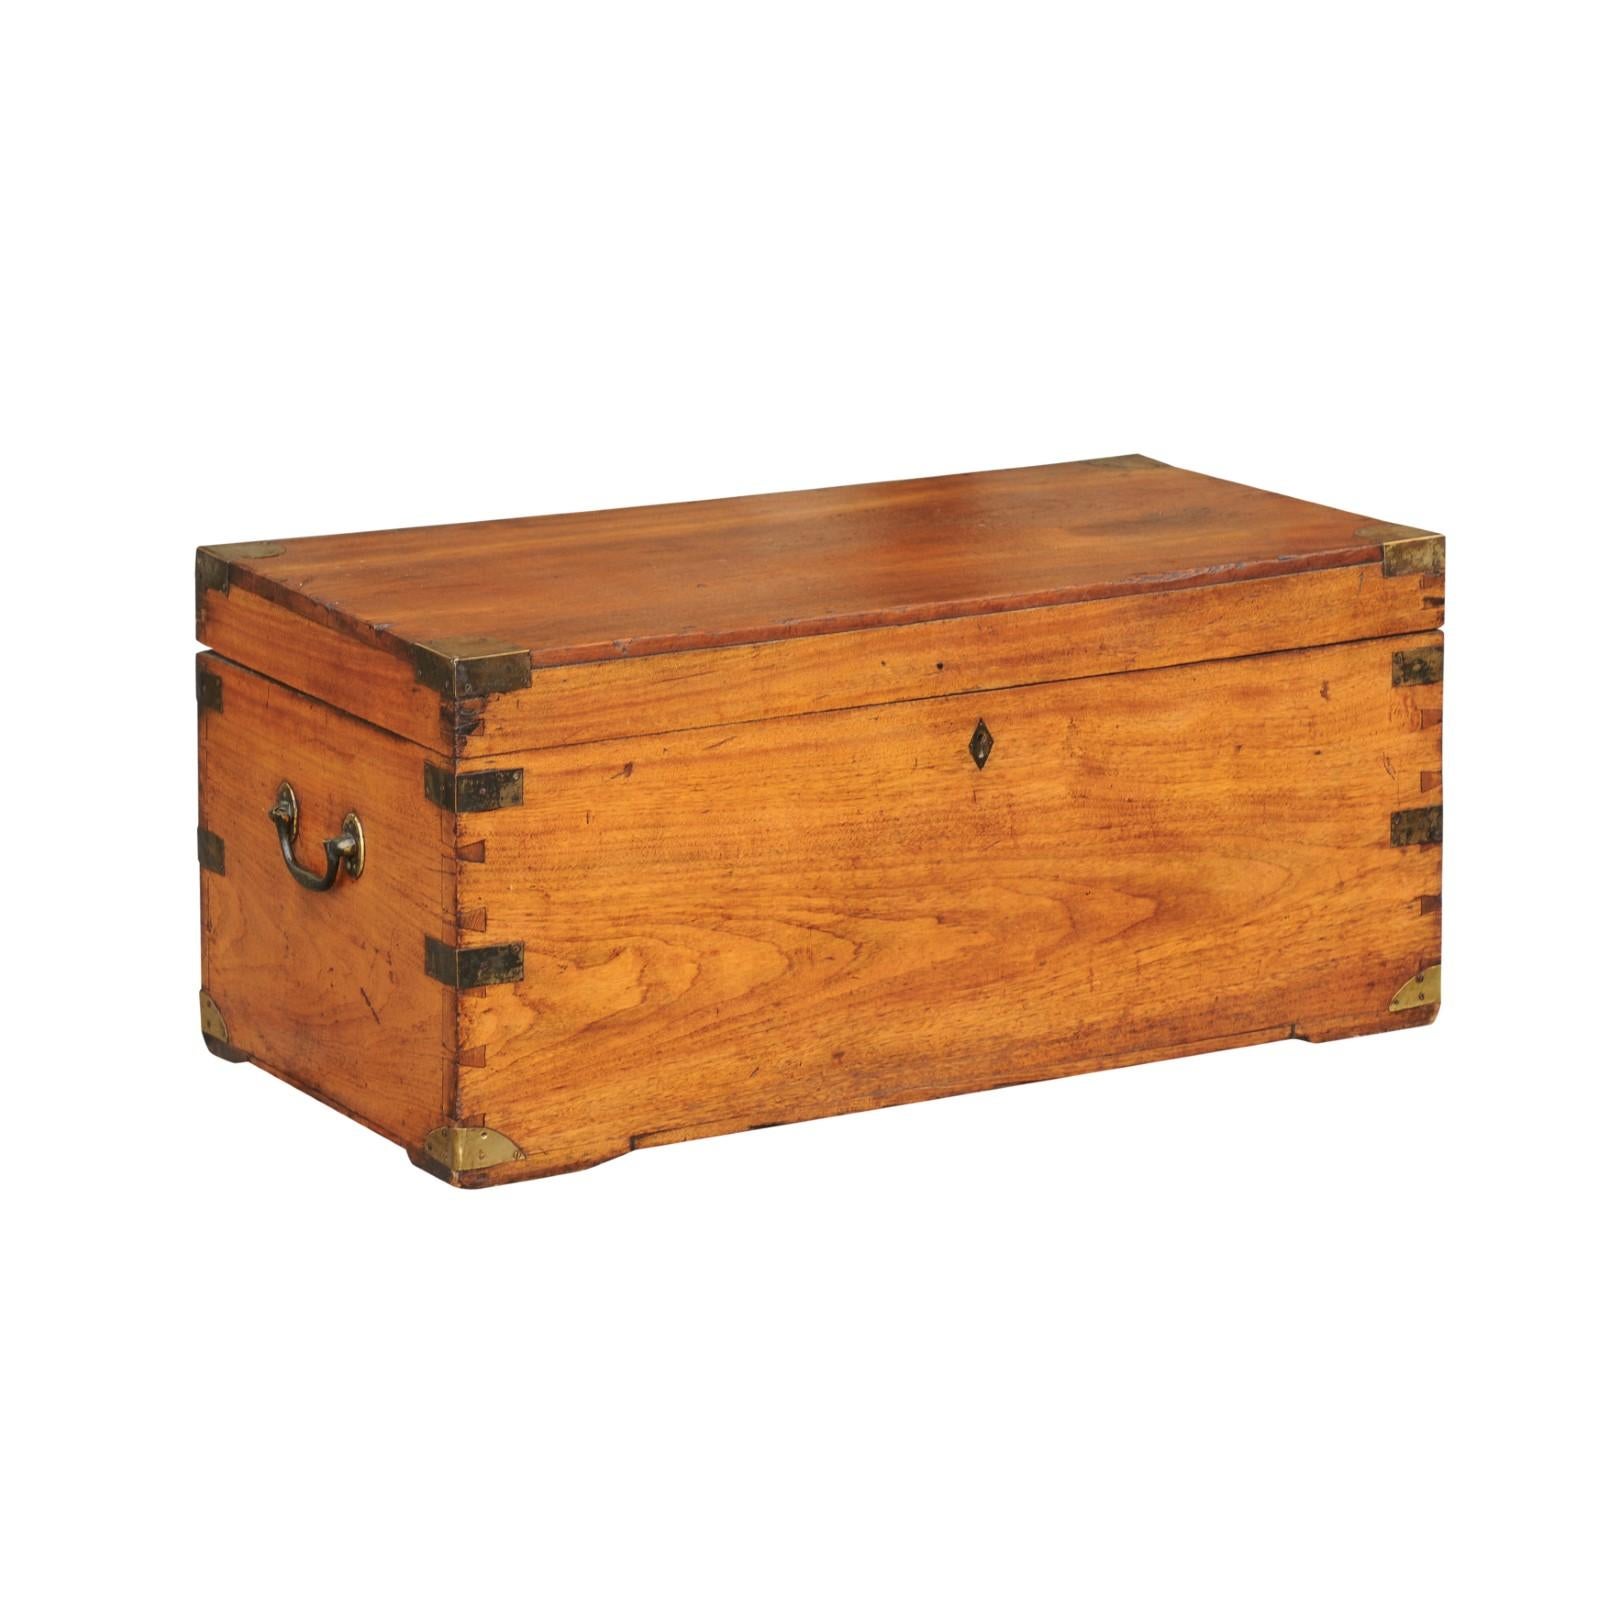 Turn of the Century English Camphor Wood Box with Brass Accents, circa 1900